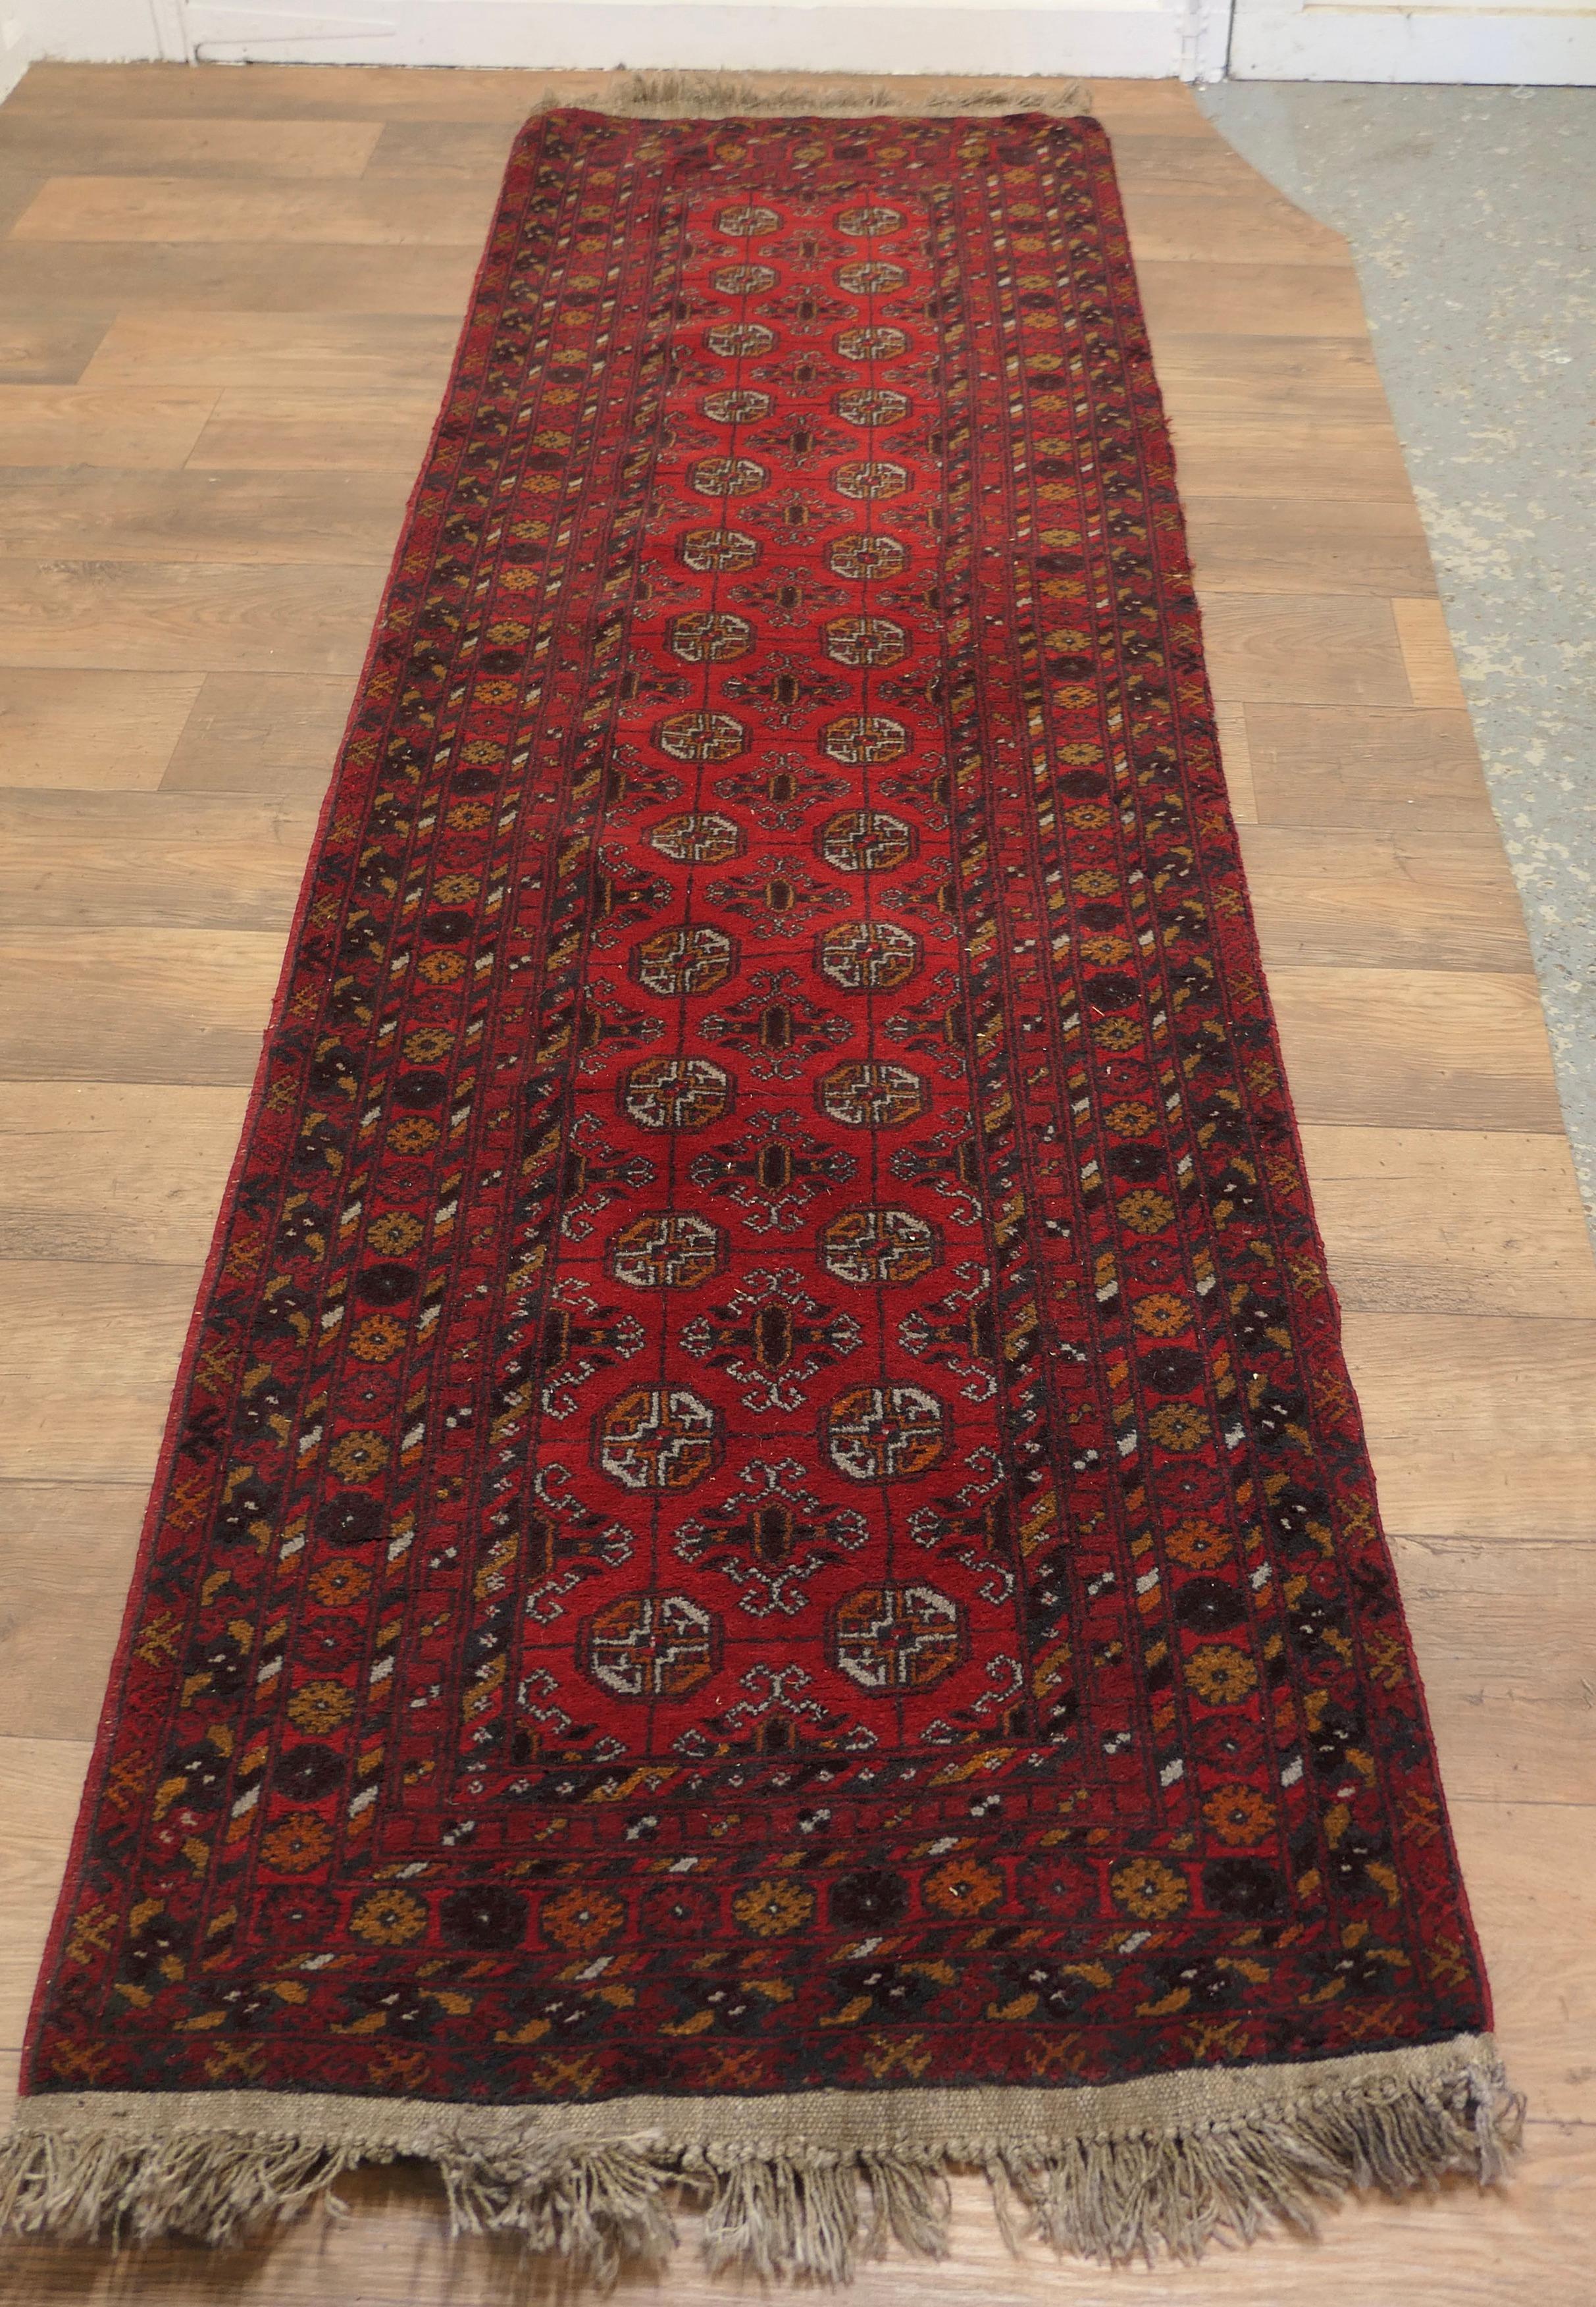 Vintage Traditional Pattern Wool 10ft Carpet Runner

A superb looking piece dating from around 1930 and it has a lovely colour palette of deep red with some dark blue and orange

This piece is in good overall condition, it has a bit of loss in